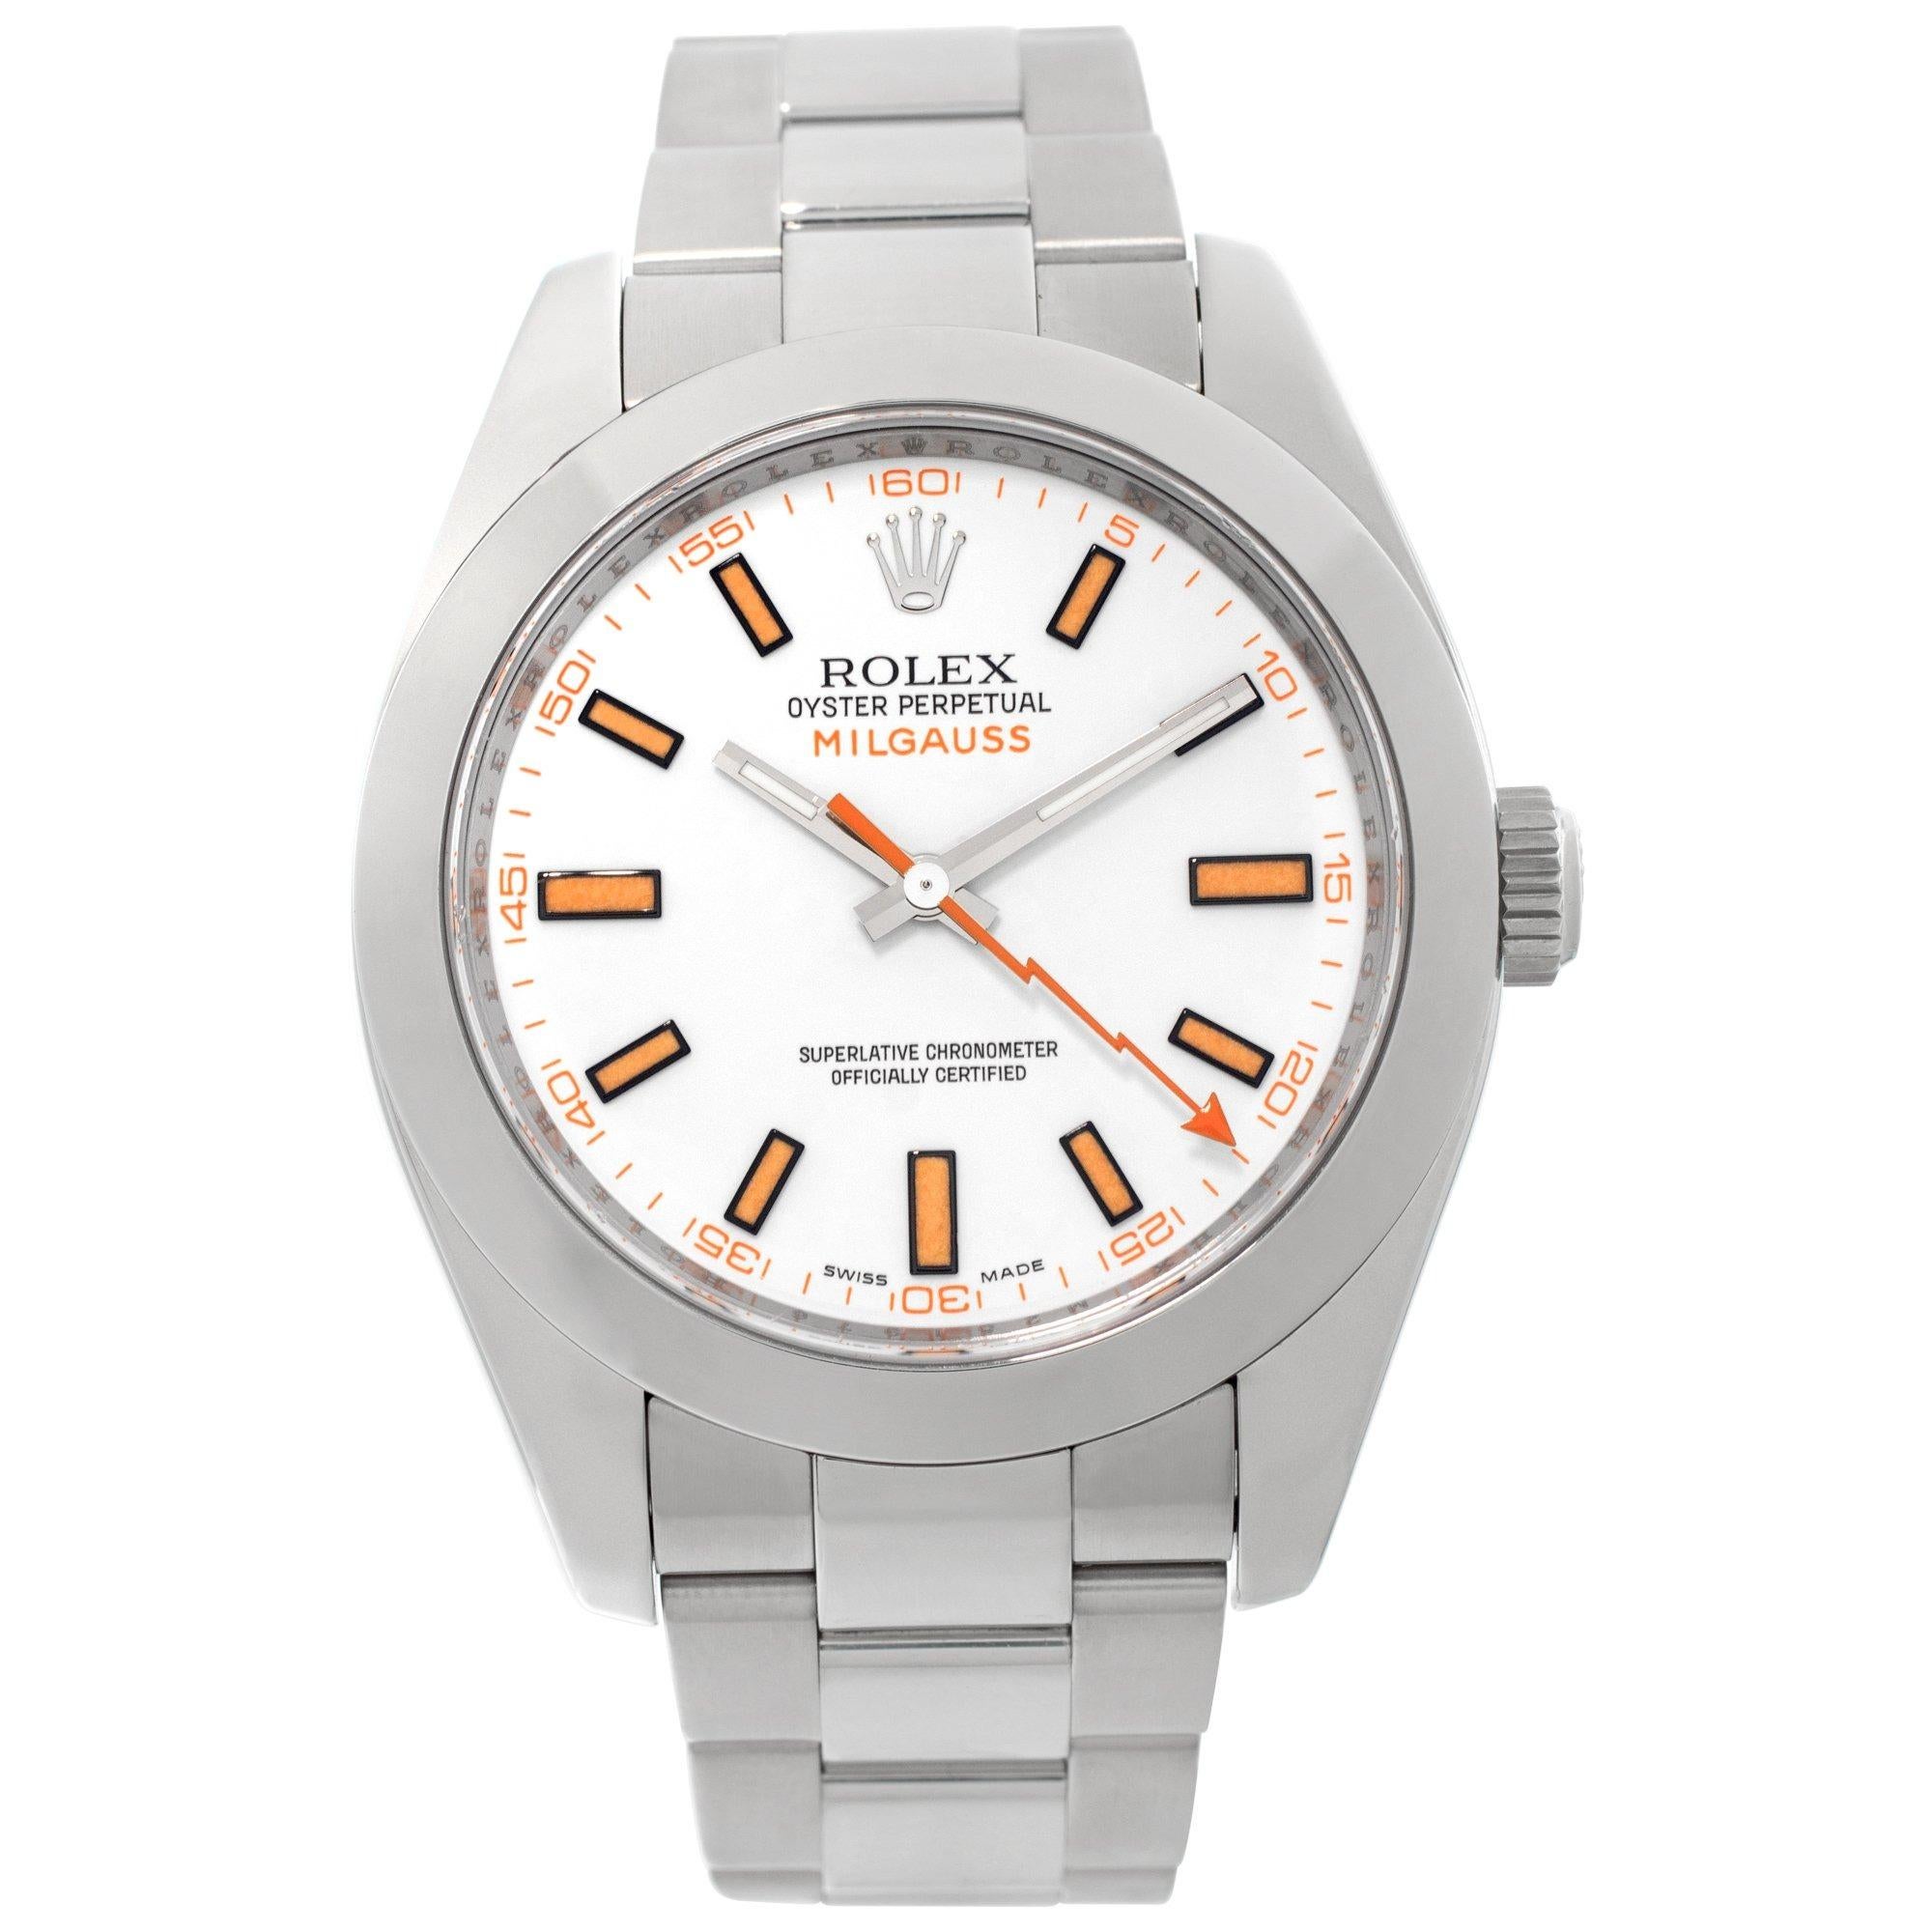 Rolex Milgauss 116400 in Stainless Steel with a White dial 40mm Automatic watch